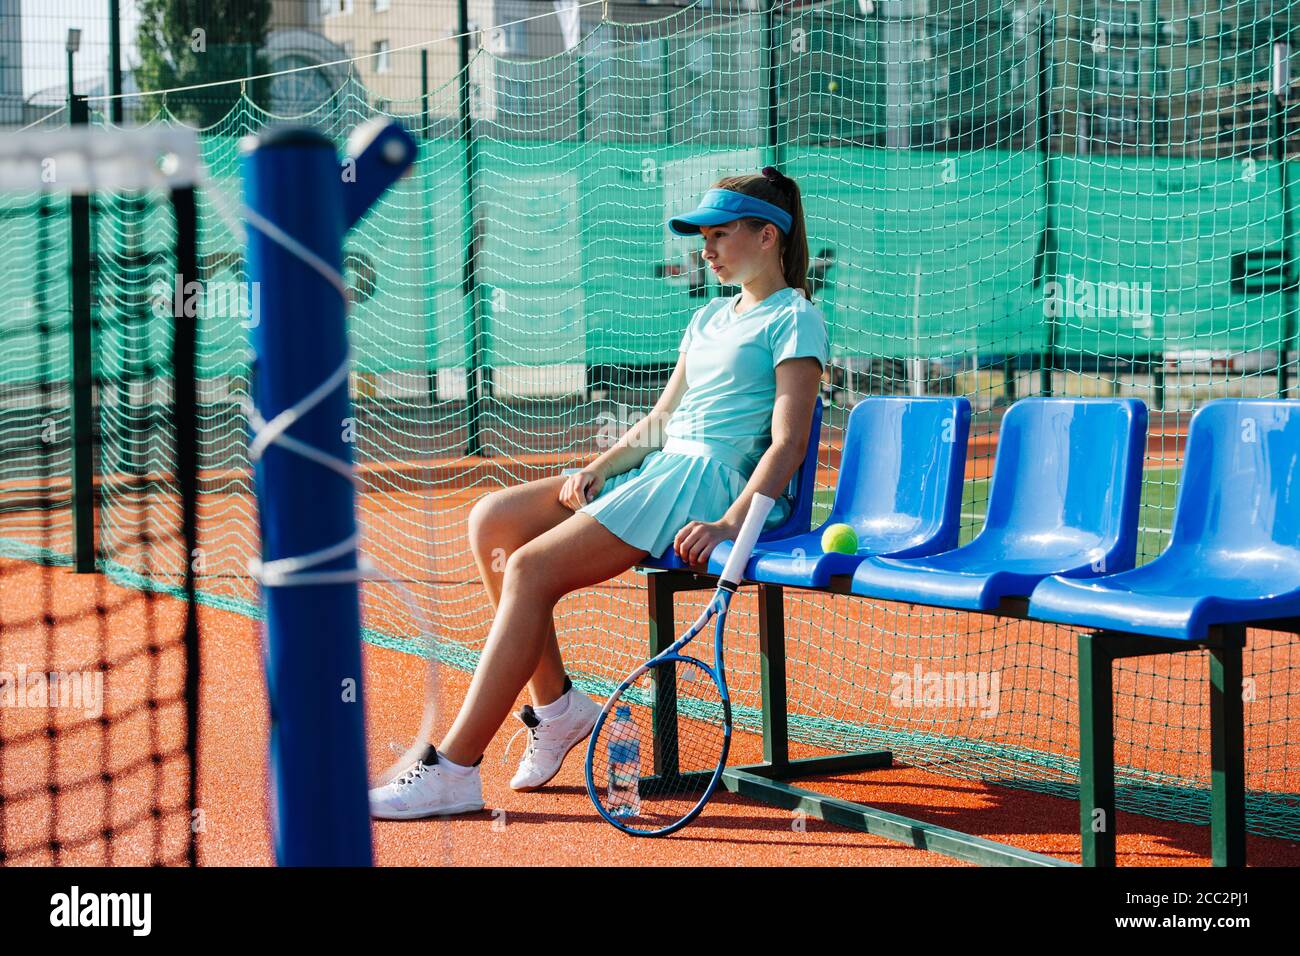 Emotionless girl sitting on a chair bench next to tennis court Stock Photo